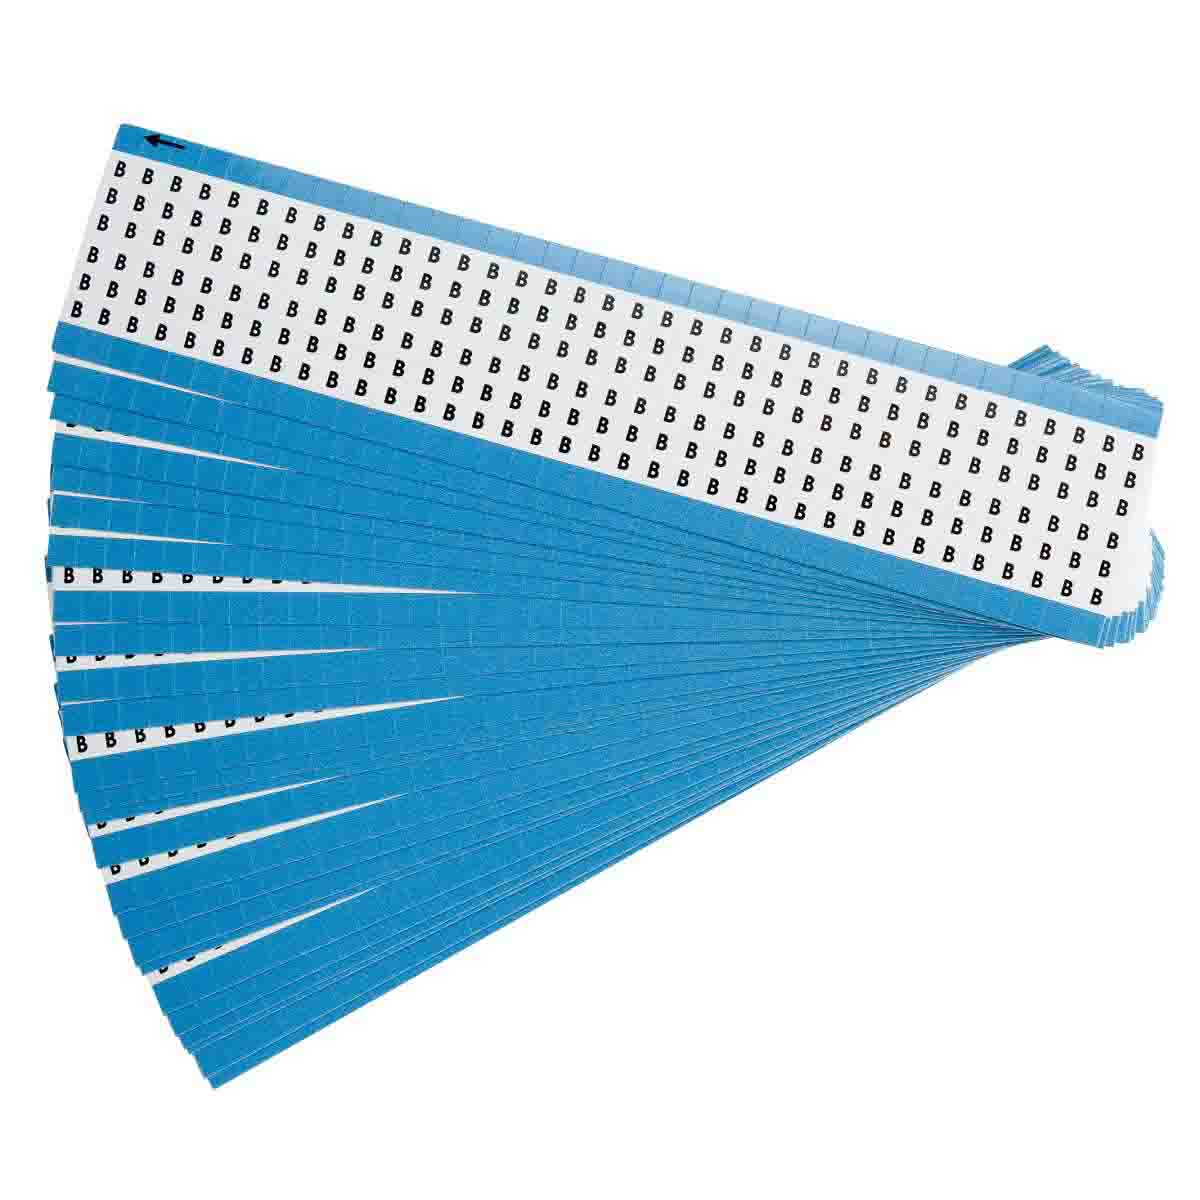 B-500 Black on White Brady WM-161-PK Repositionable Vinyl Cloth Solid Numbers Wire Marker Card 25 Cards 